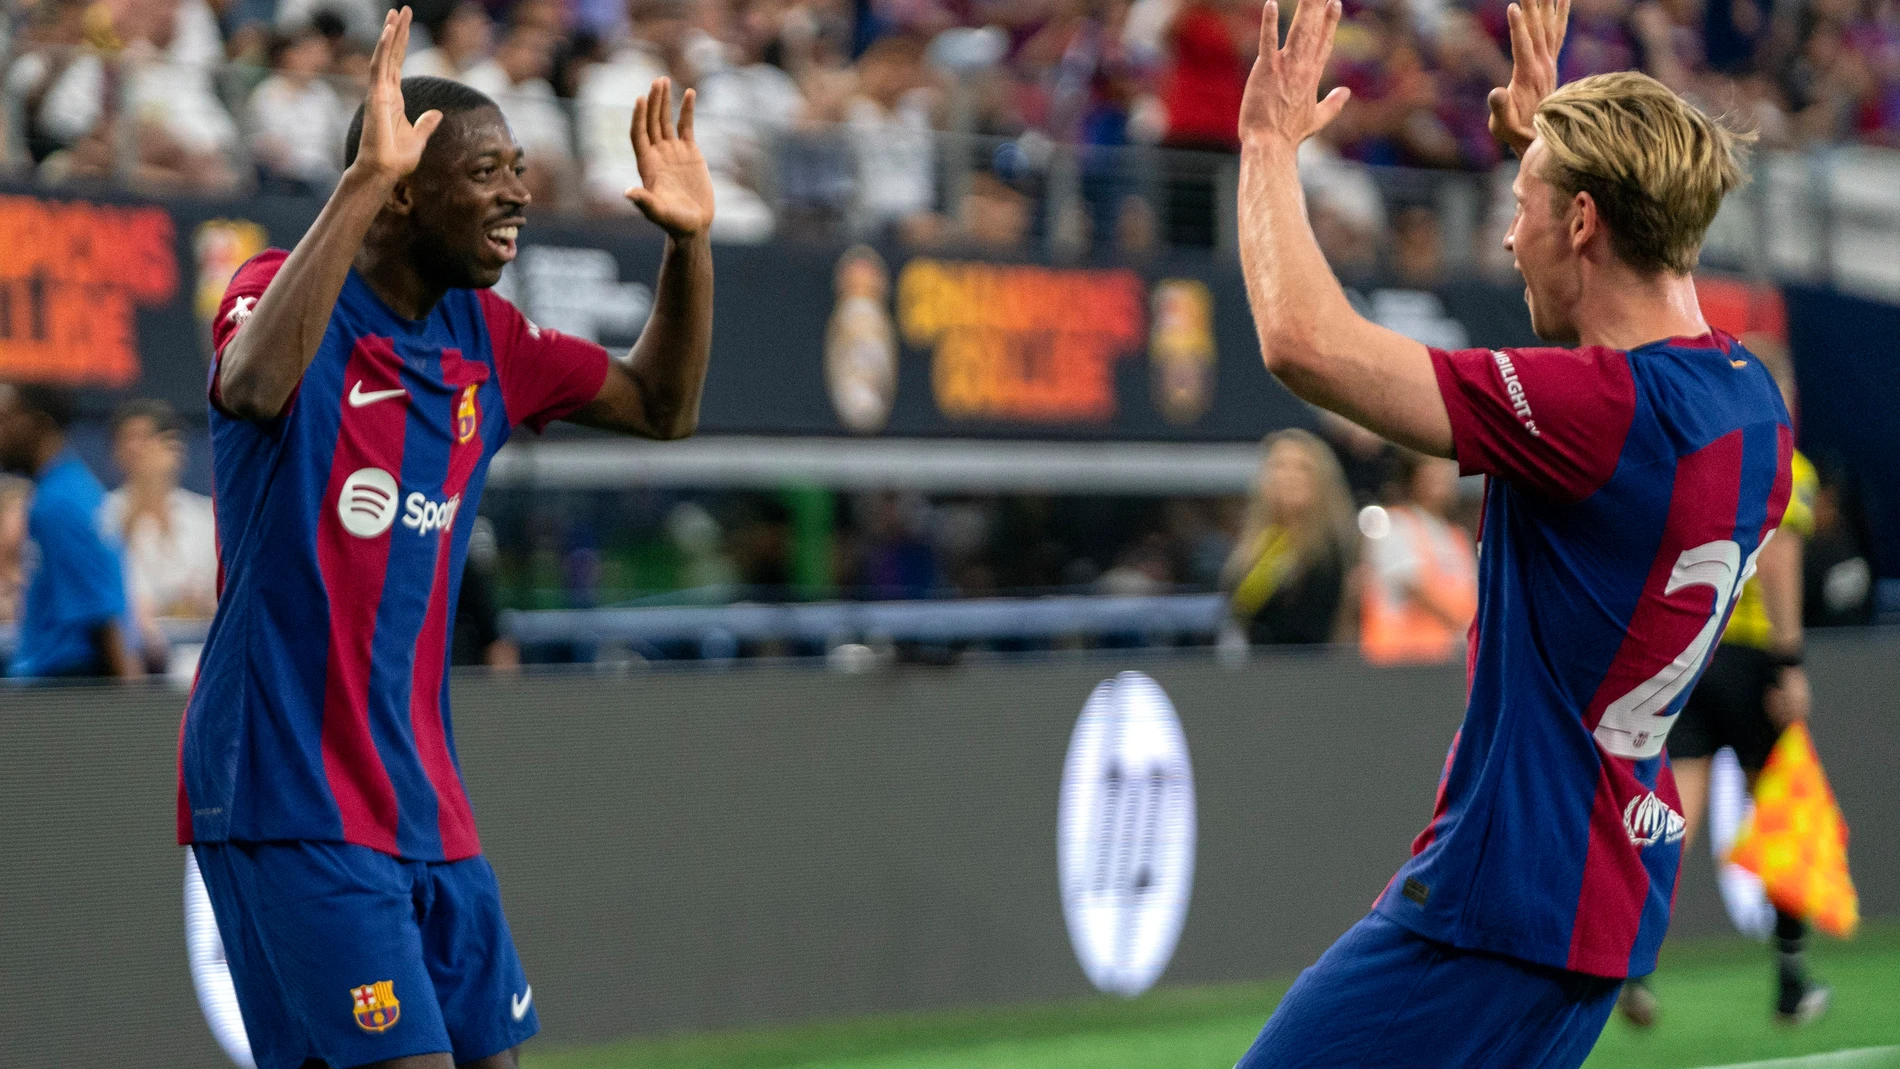 FC Barcelona forward Ousmane Dembele, left, celebrates with midfielder Frenkie de Jong (21) after scoring a goal against Real Madrid during the first half of a Champions Tour soccer match, Saturday, July 29, 2023 at AT&T Stadium in Arlington, Texas. (AP Photo/Jeffrey McWhorter)